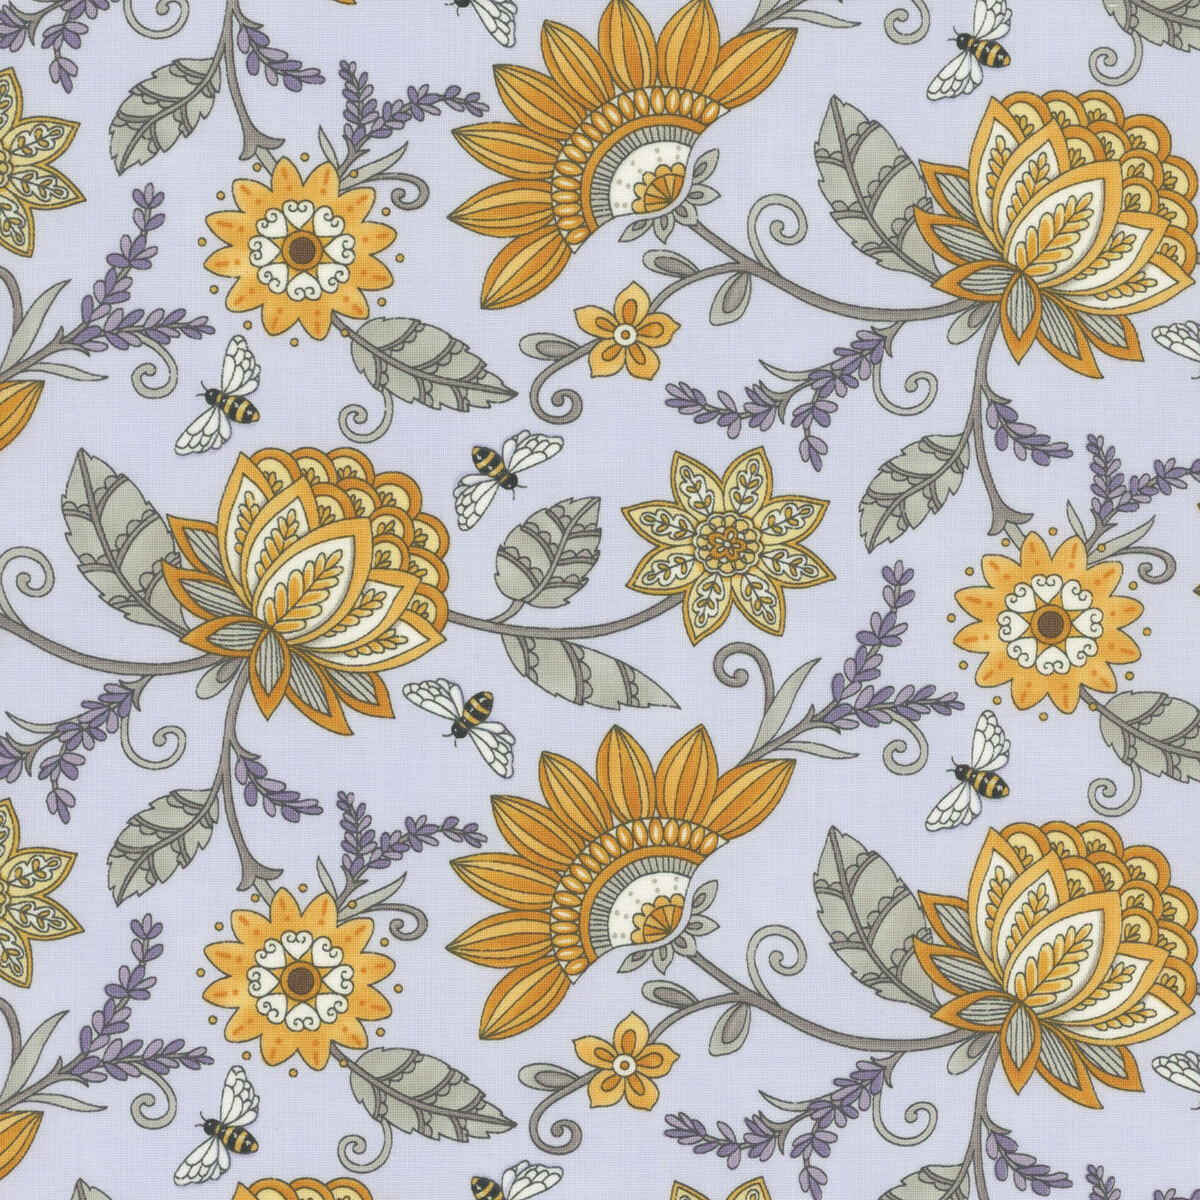 Cotton Hand Embroidery Fabric - Light Honey - Stitched Modern